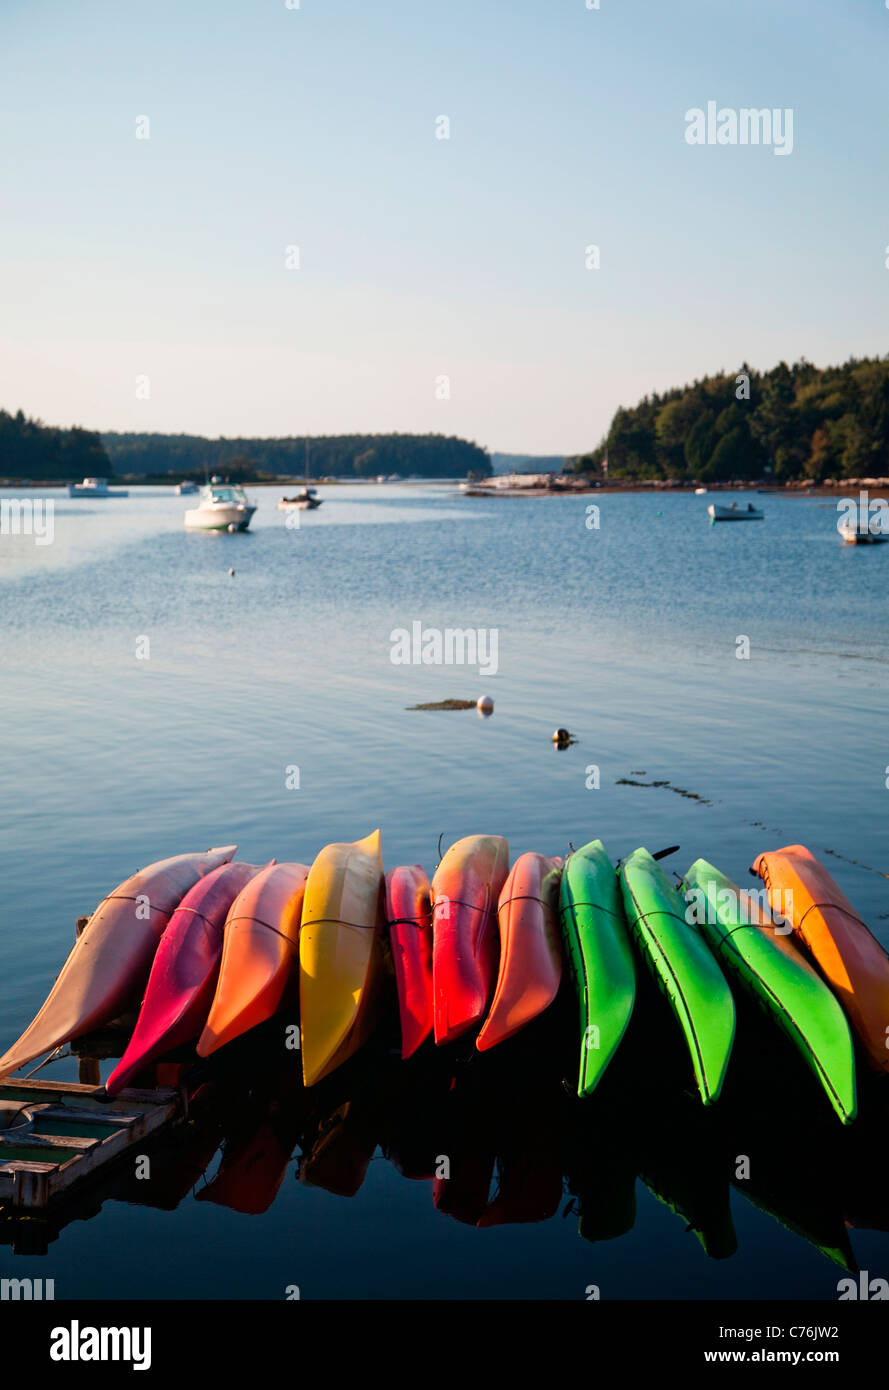 A line of colorful canoes in a small harbor at dusk. Stock Photo